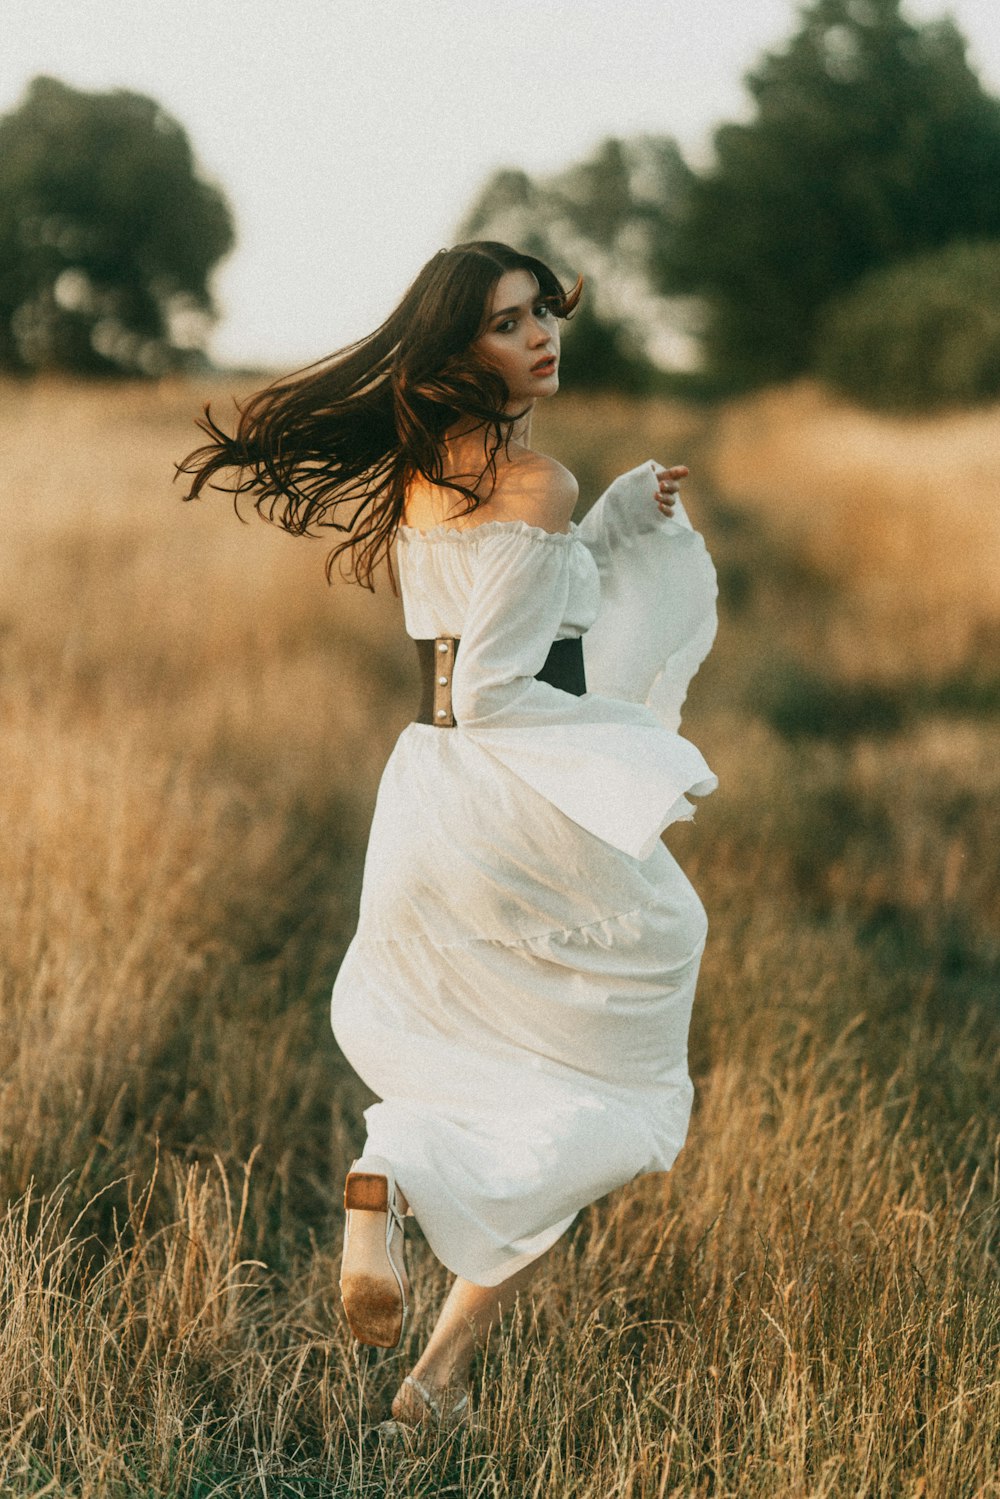 a woman in a white dress is running through a field